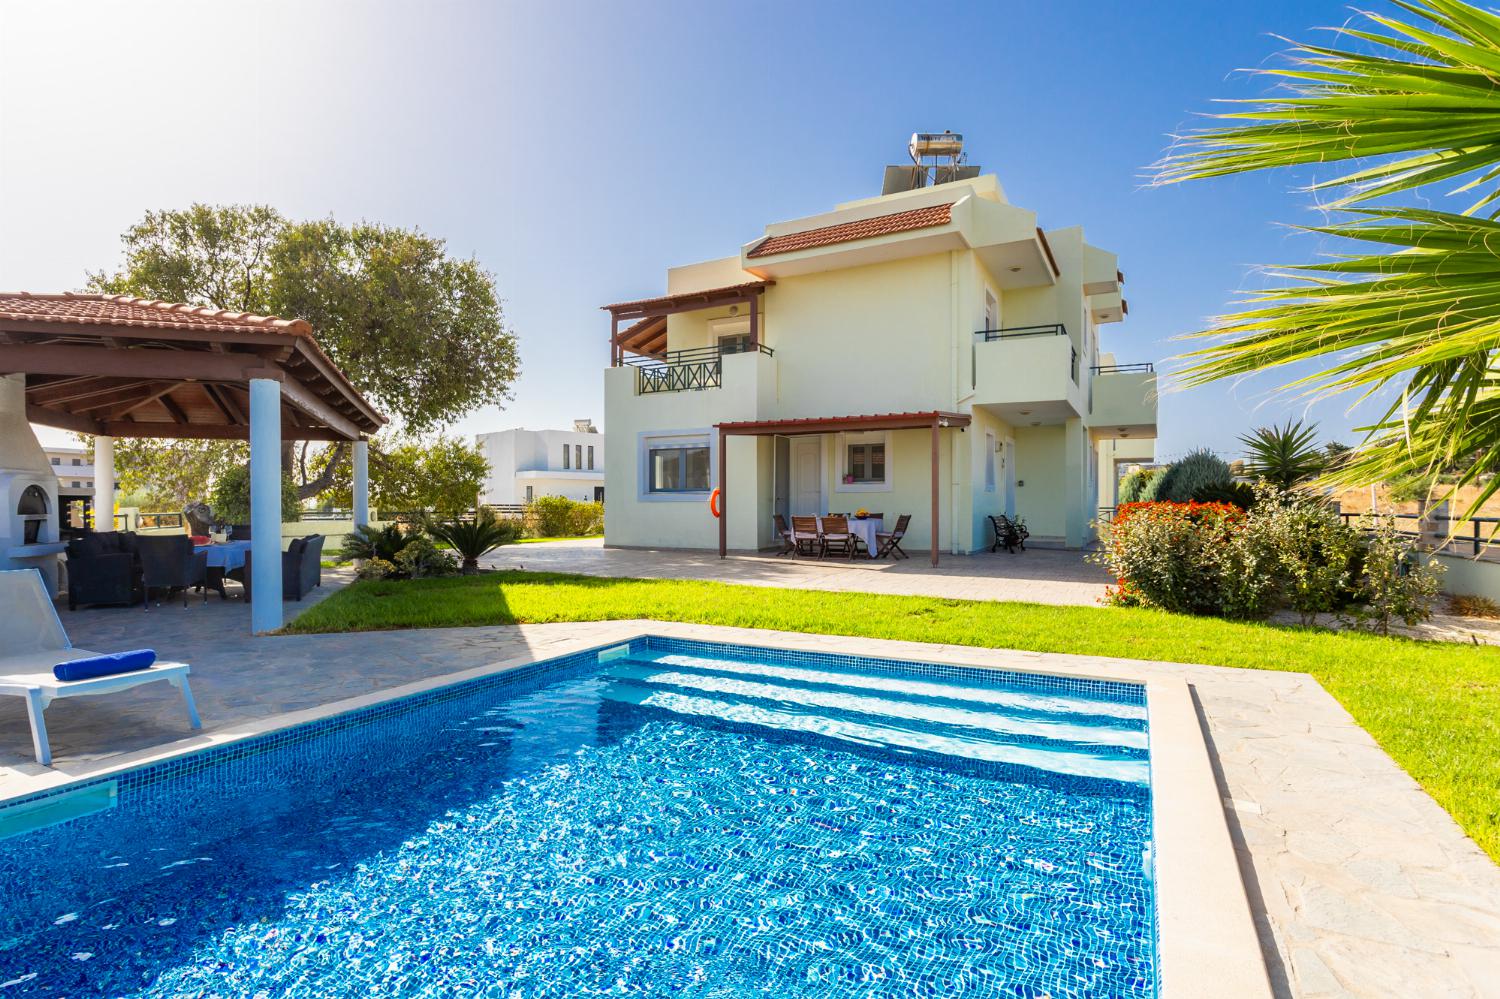 ,Beautiful villa with private pool, terrace, and garden